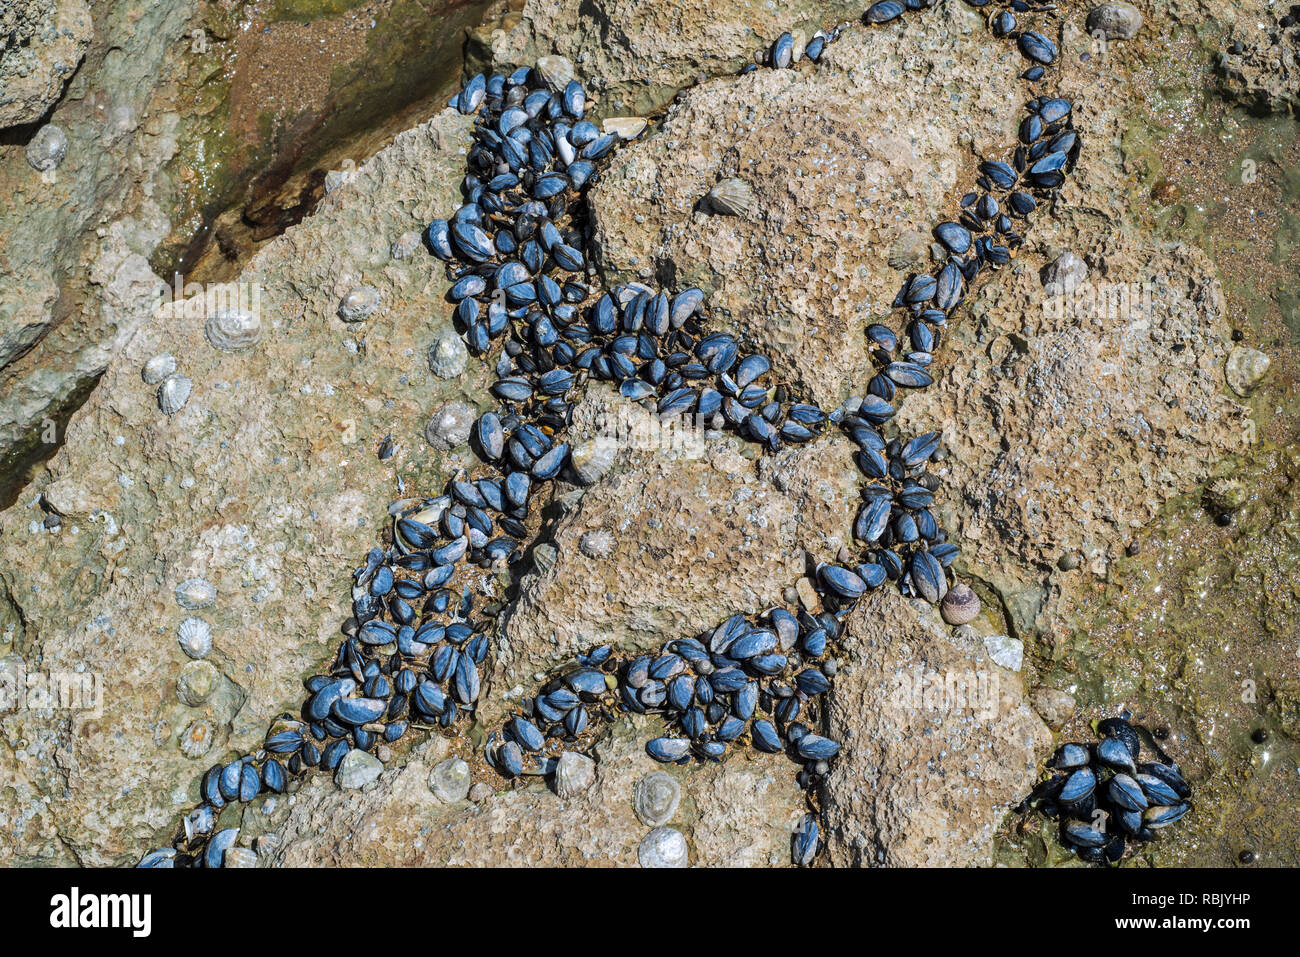 Live blue mussels / common mussels (Mytilus edulis) in mussel bed and common limpets (Patella vulgata) on rock exposed on beach at low tide Stock Photo